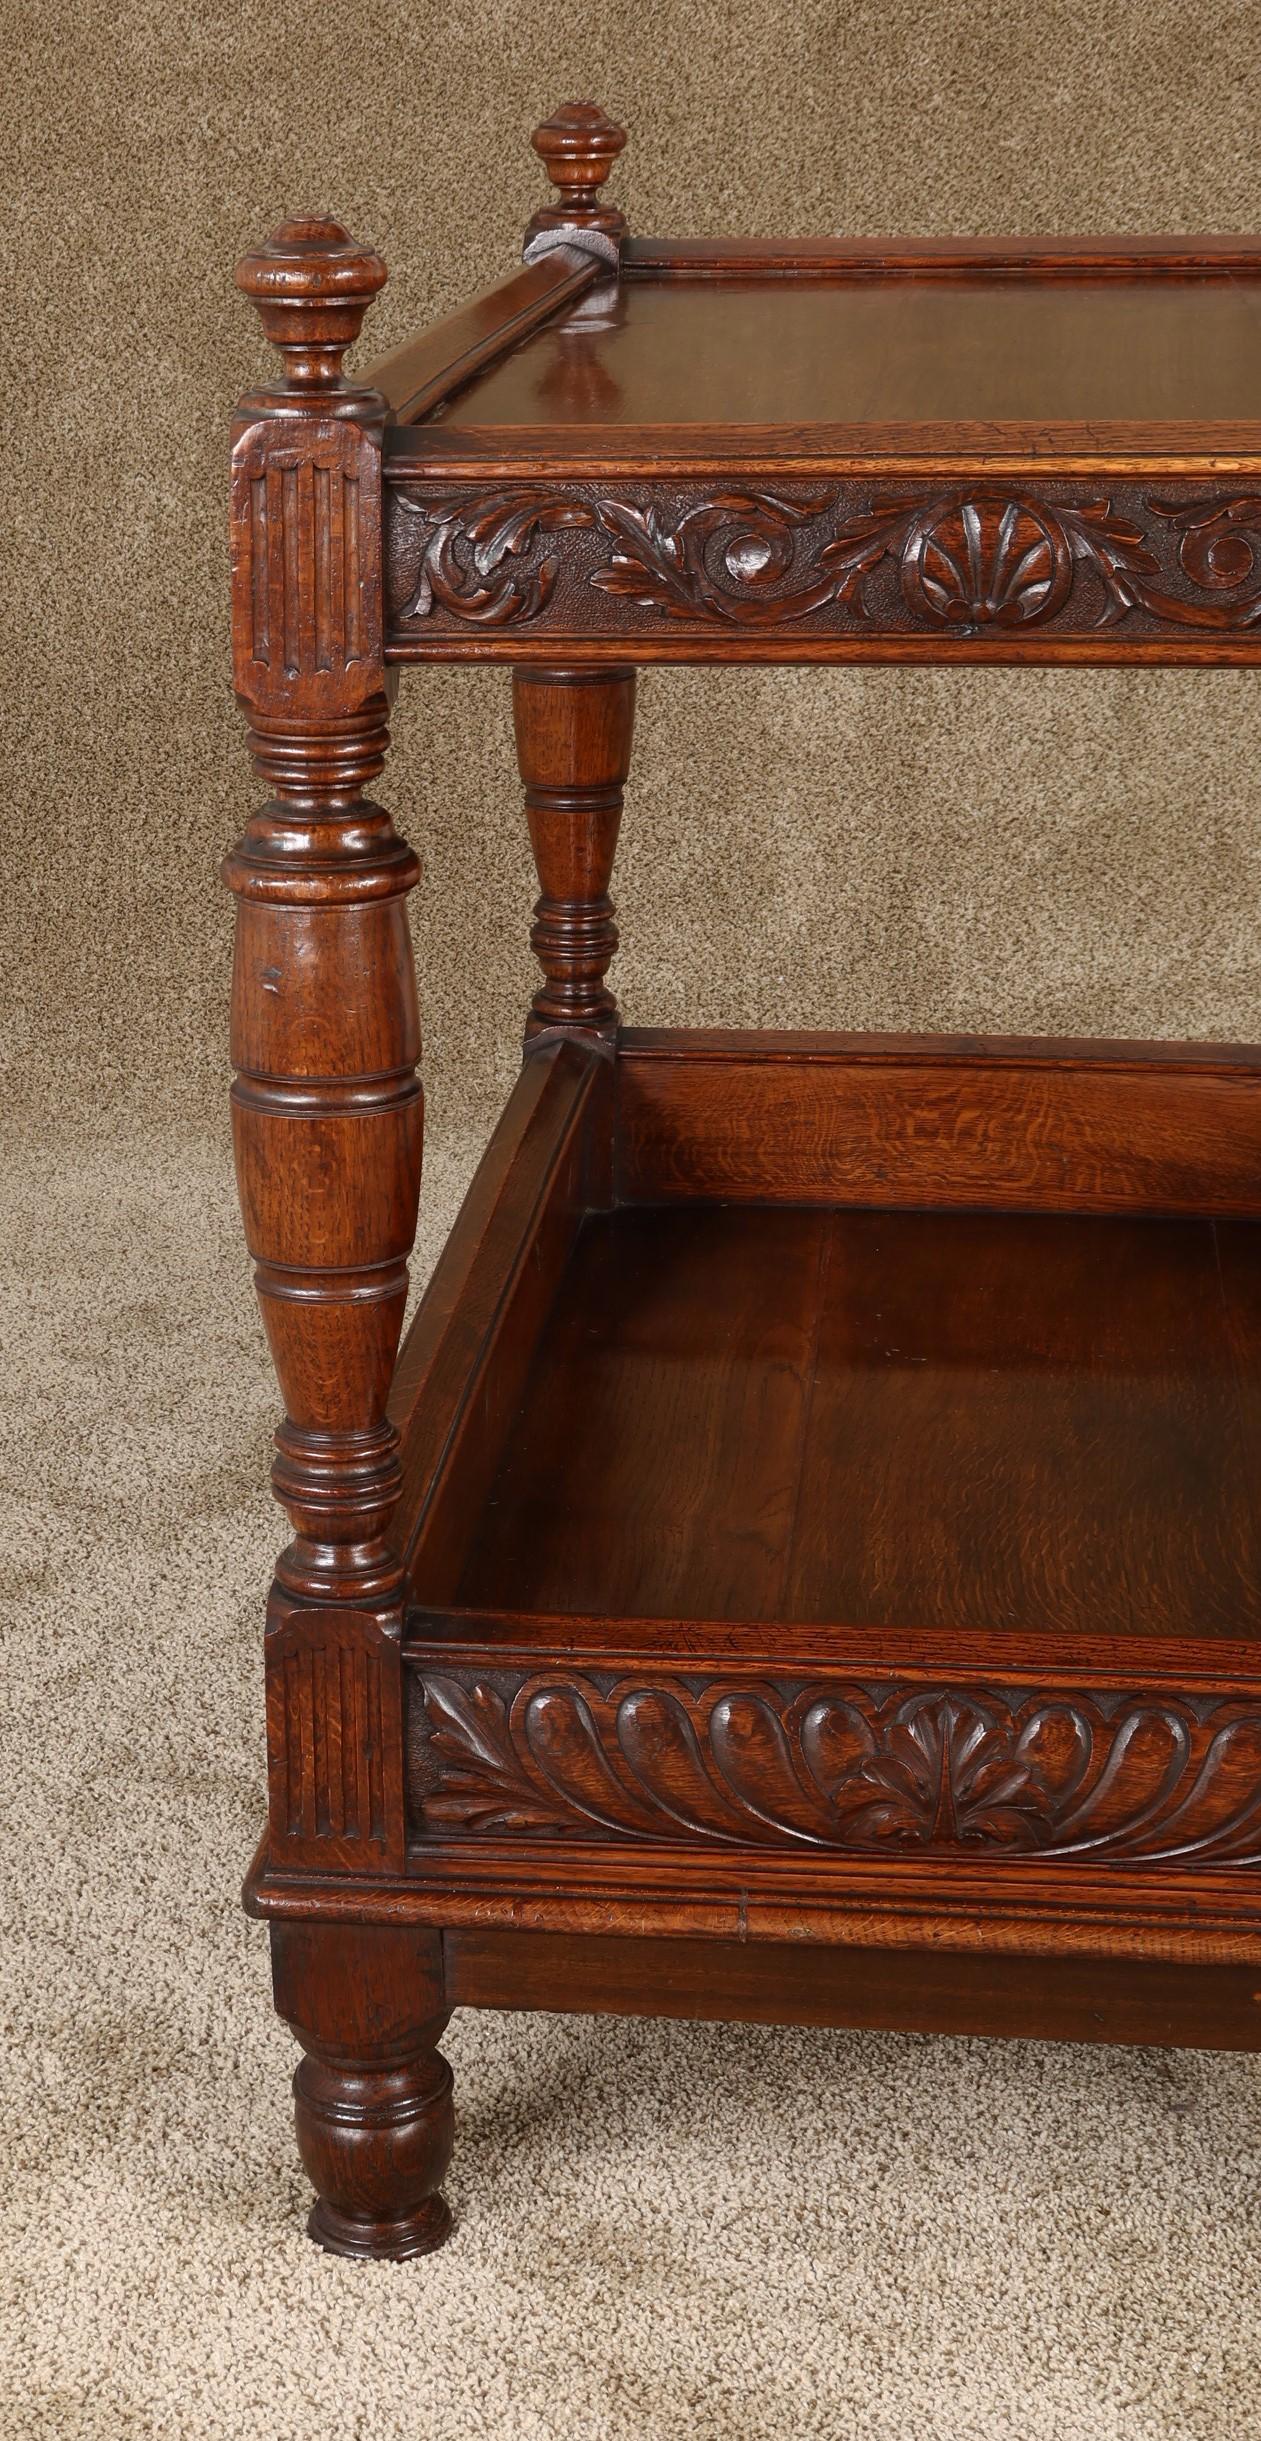 Antique English Tudor Revival well-carved oak server with two tiers, turned uprights and feet. A very useful serving piece of good color and patina,
circa 1890.